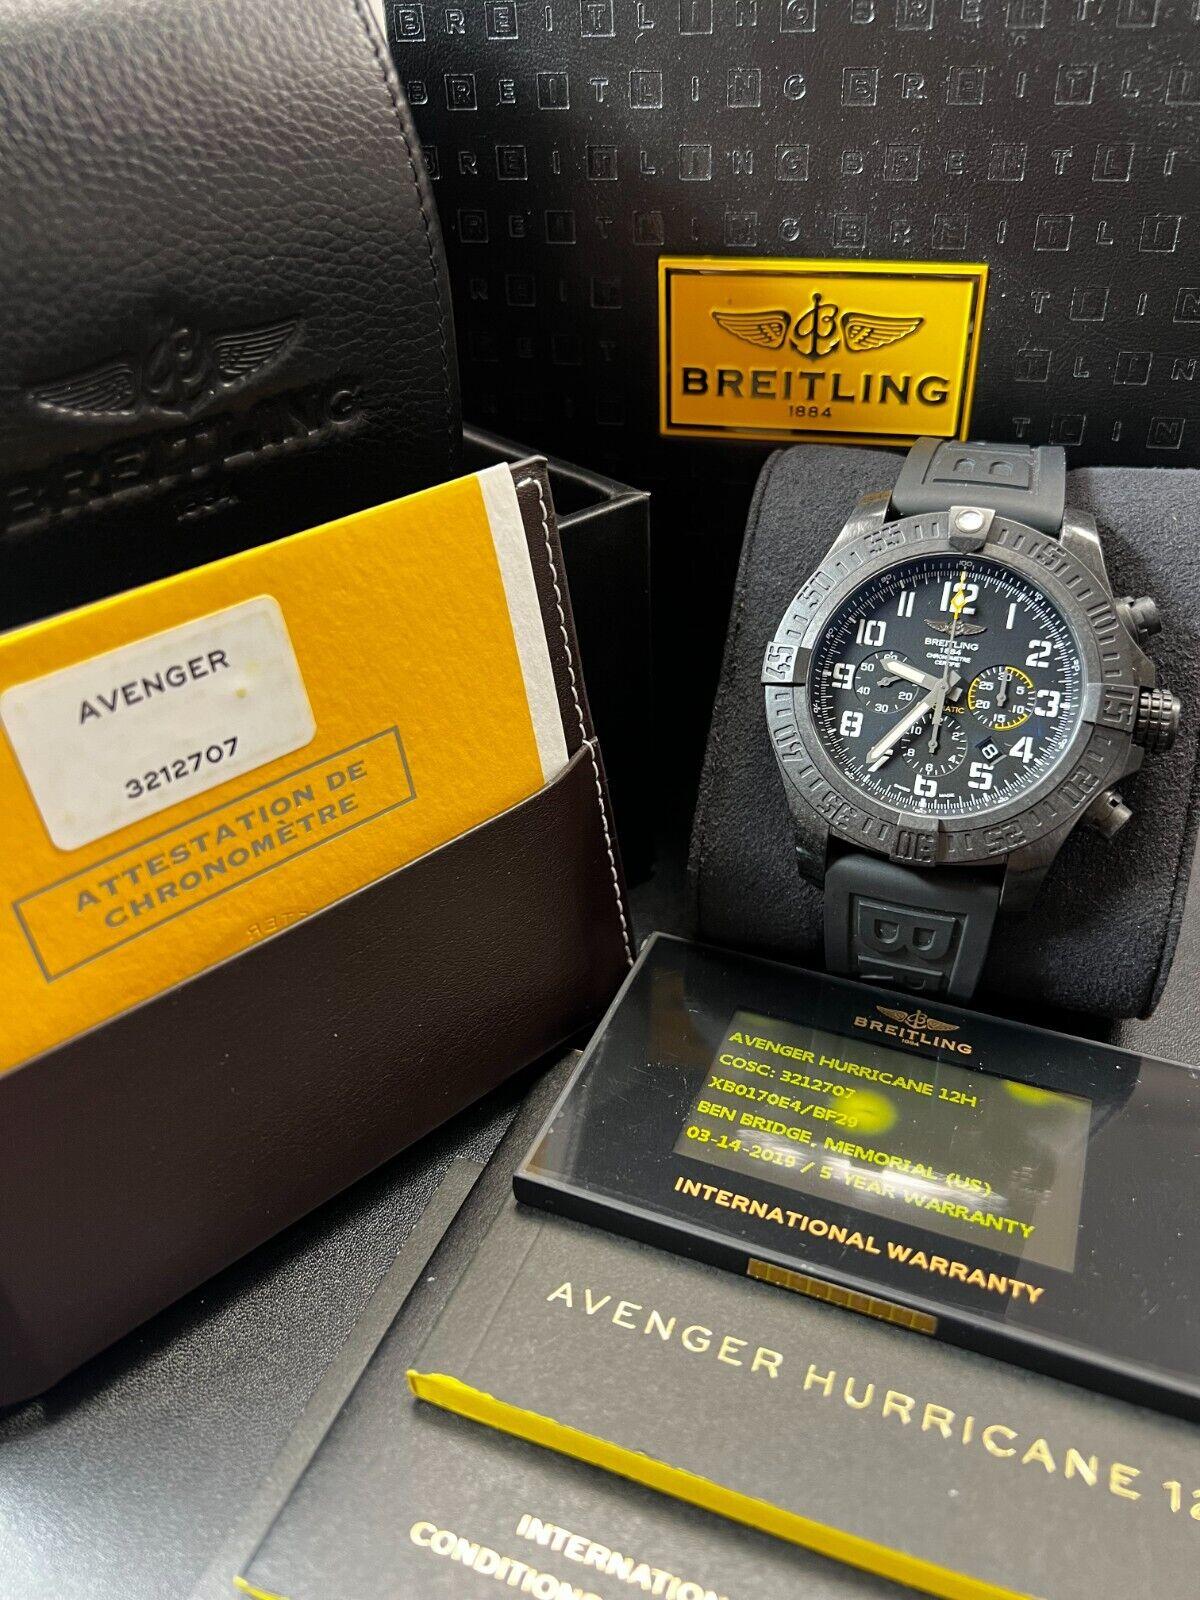 Style Number: XB0170

Year: 2019
 
Model: Avenger Hurricane
 
Case Material: Black Polymer 

Band: Black Rubber
 
Bezel:  Black Polymer 
 
Dial: Black
 
Face: Sapphire Crystal 
 
Case Size: 50mm 
 
Includes: 
-Breitling Box & Paper
-Certified